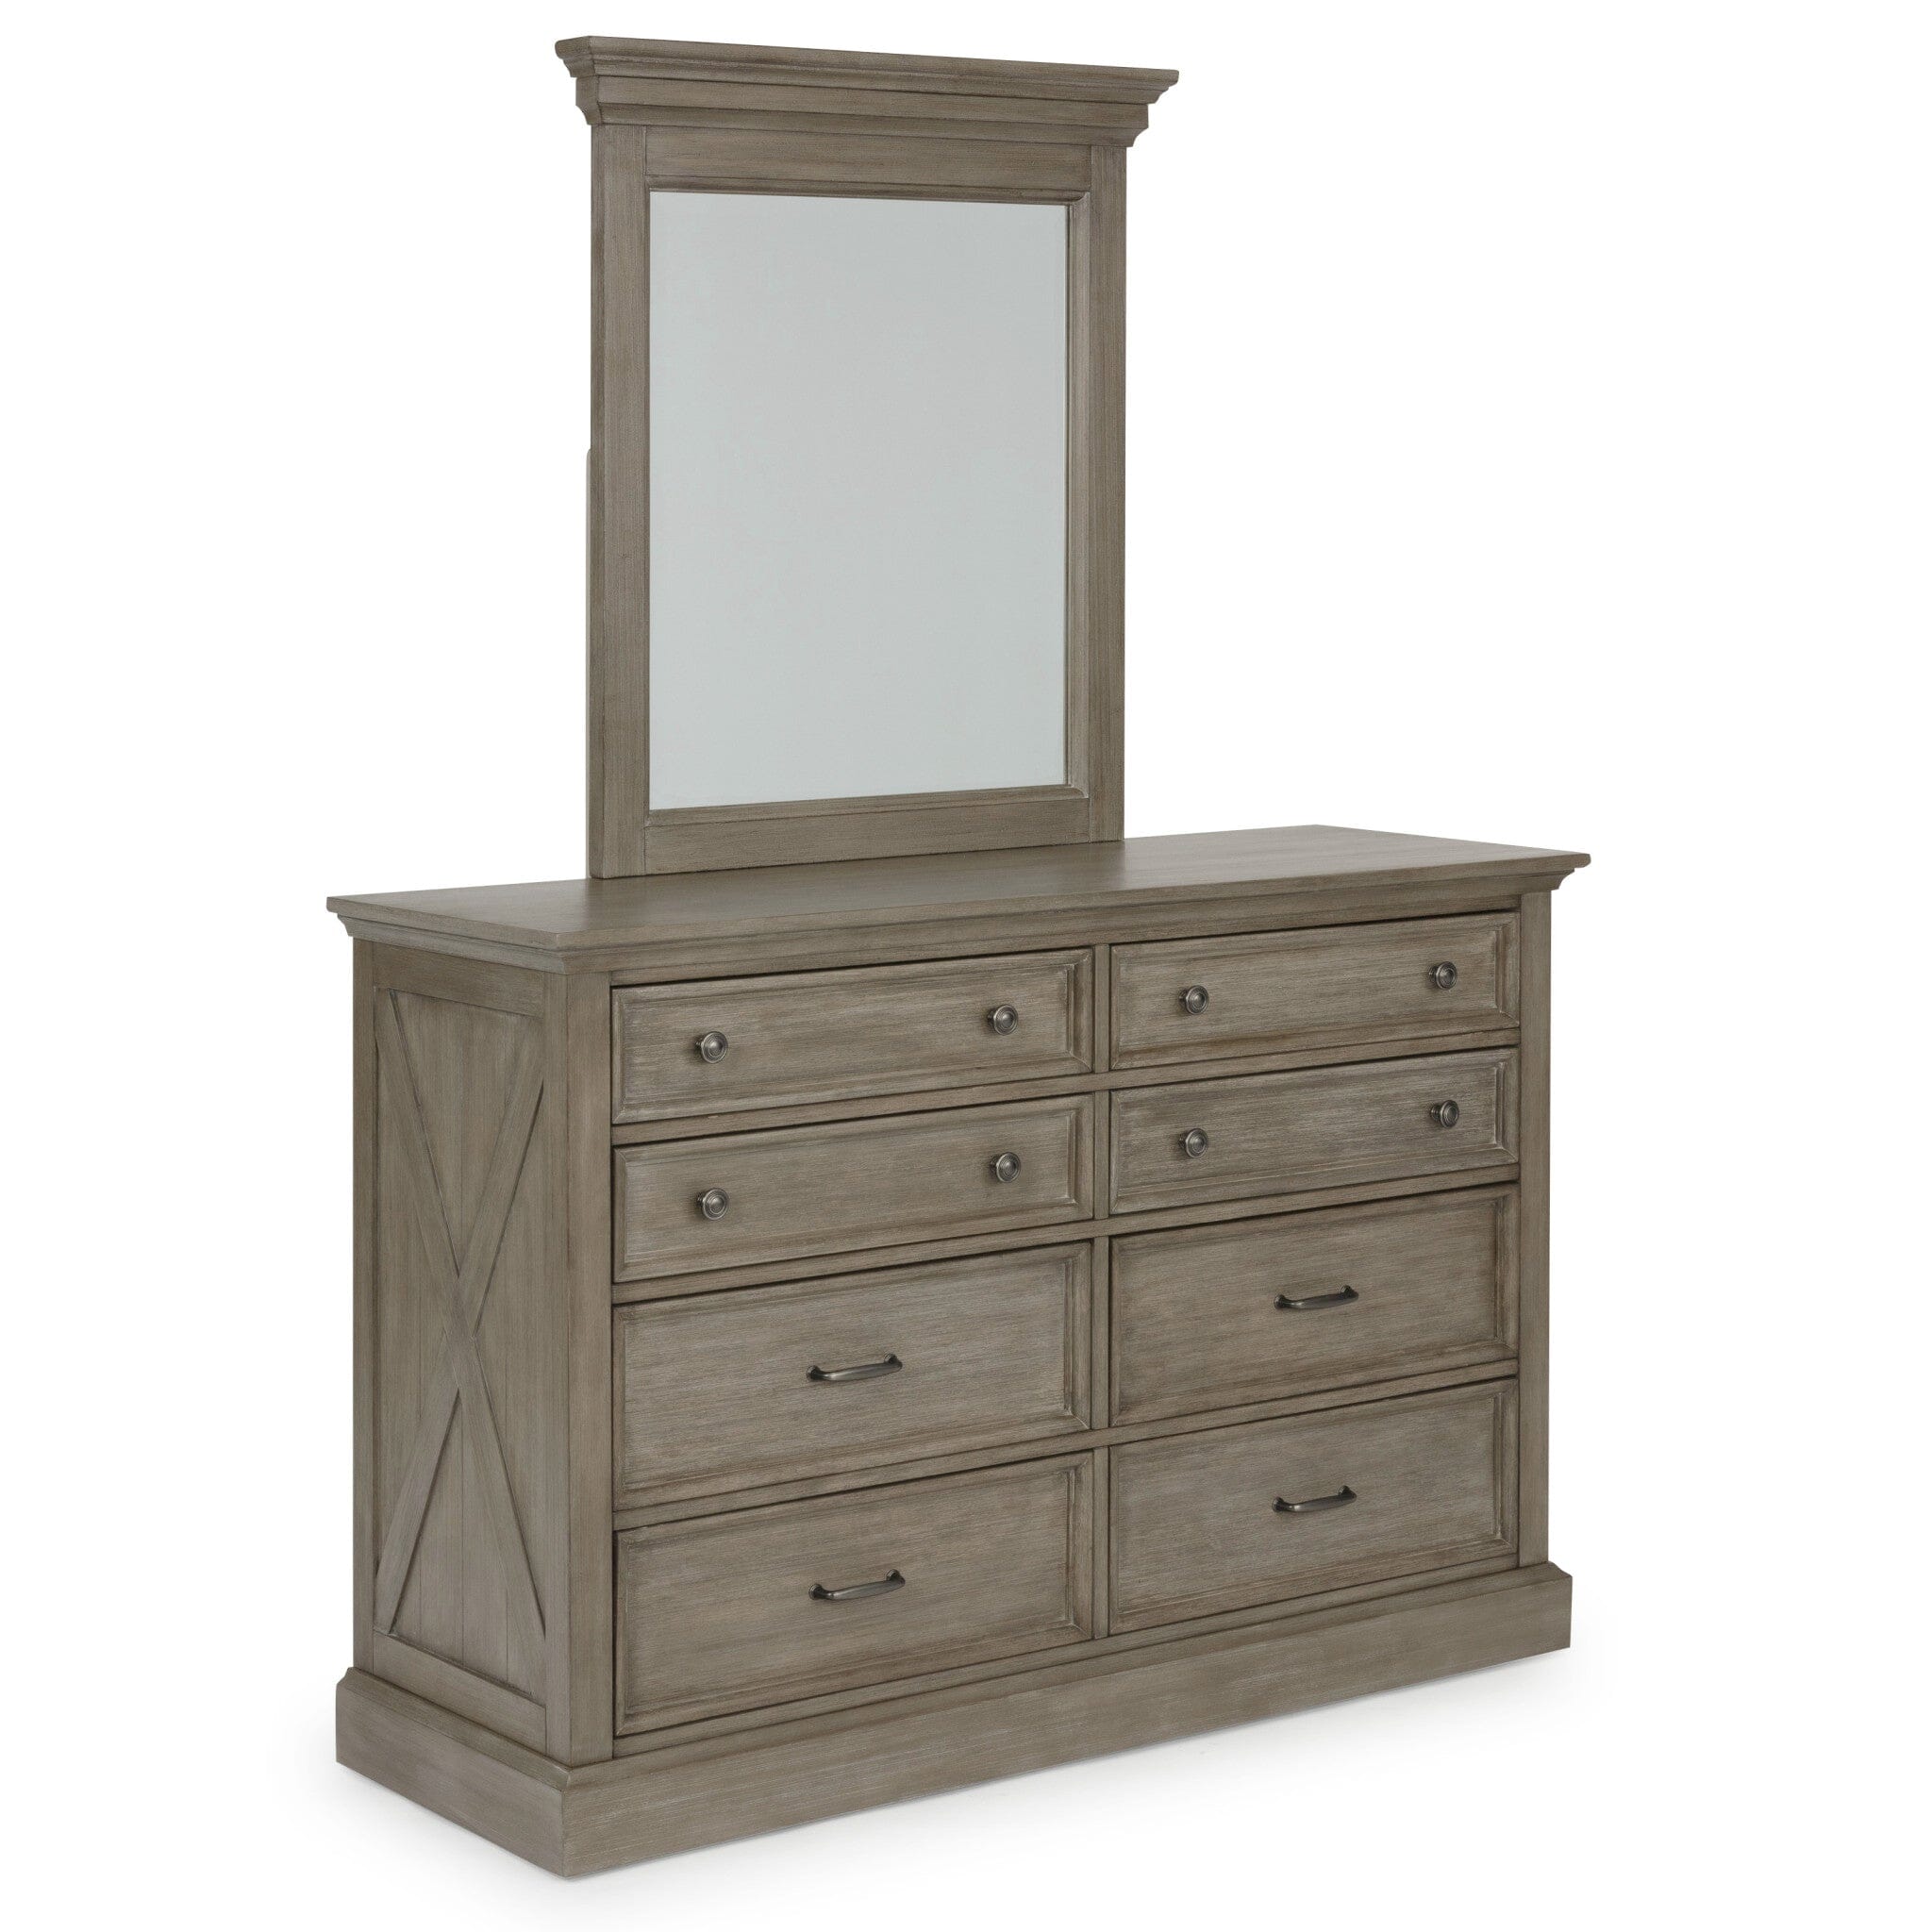 Rustic Farmhouse Dresser with Mirror By Mountain Lodge Dresser Mountain Lodge